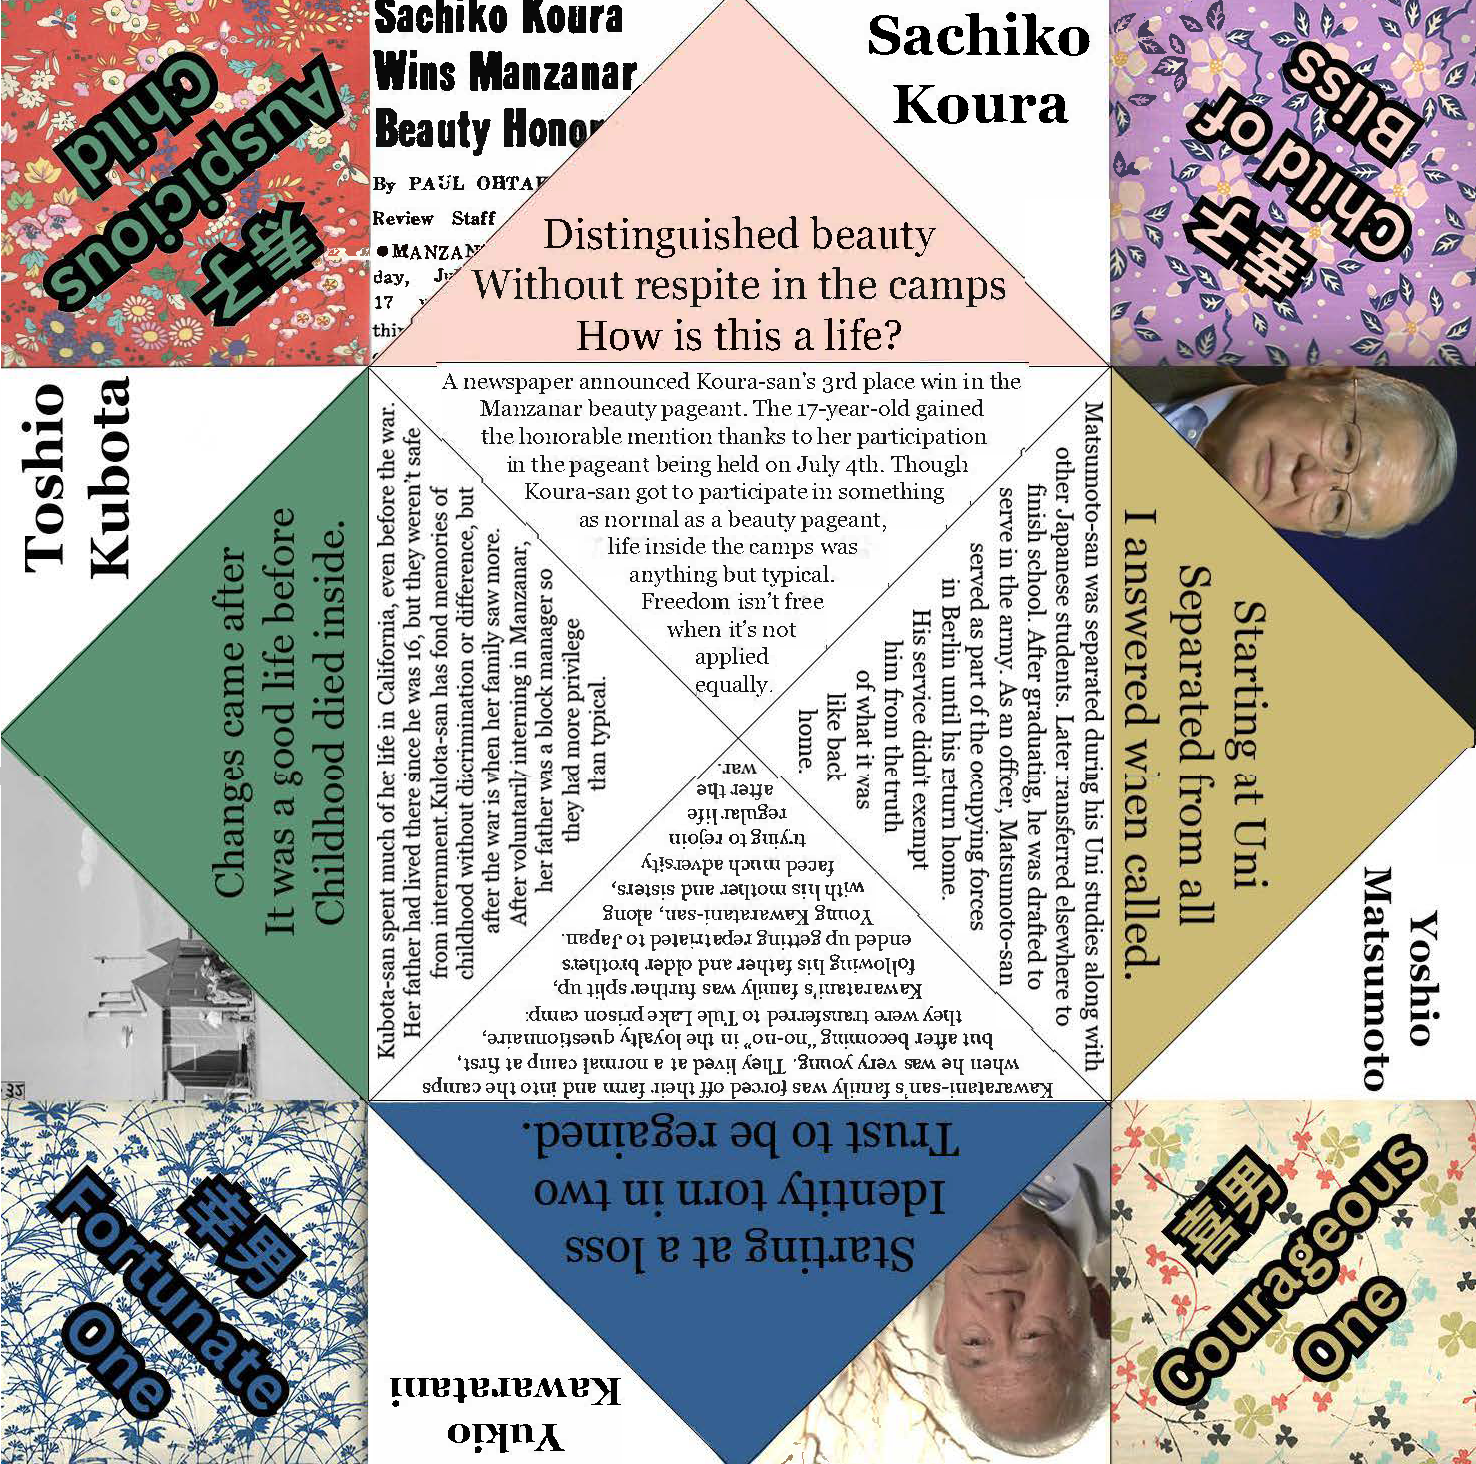 A collage of squares each with a different photo of a Japanese person, a traditional Japanese paper, or text about Japanese American incarceration camps